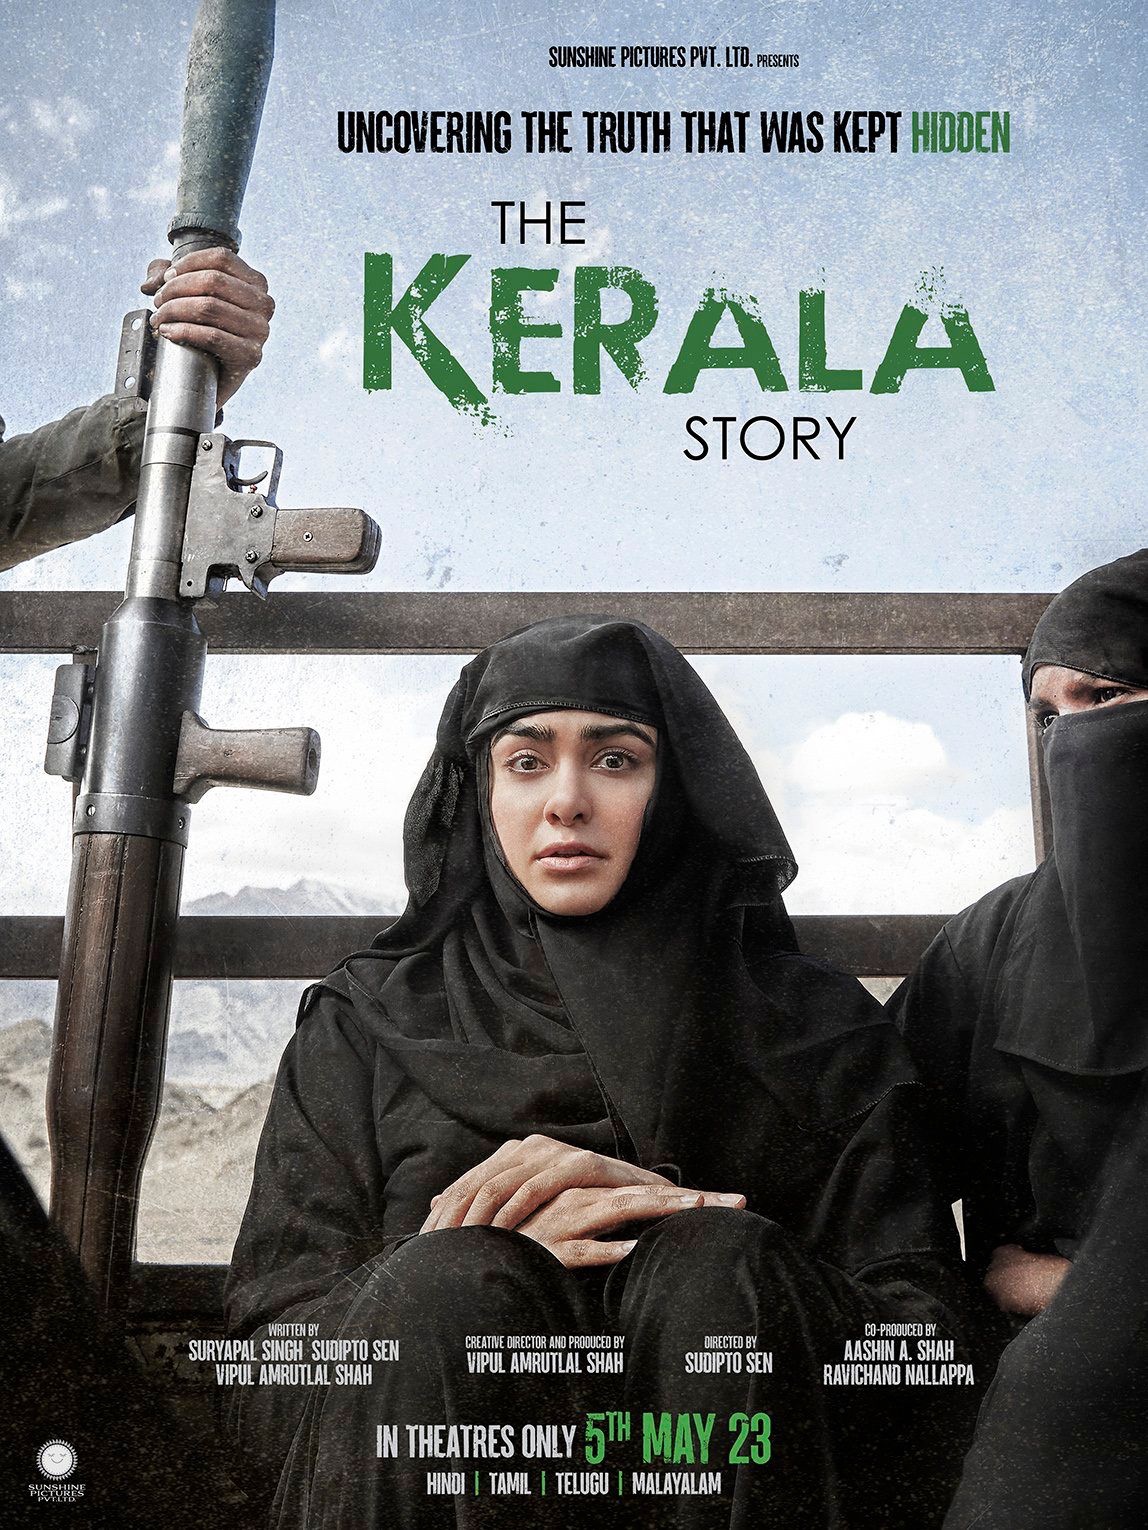 Movie Poster: ‘The Kerala Story’